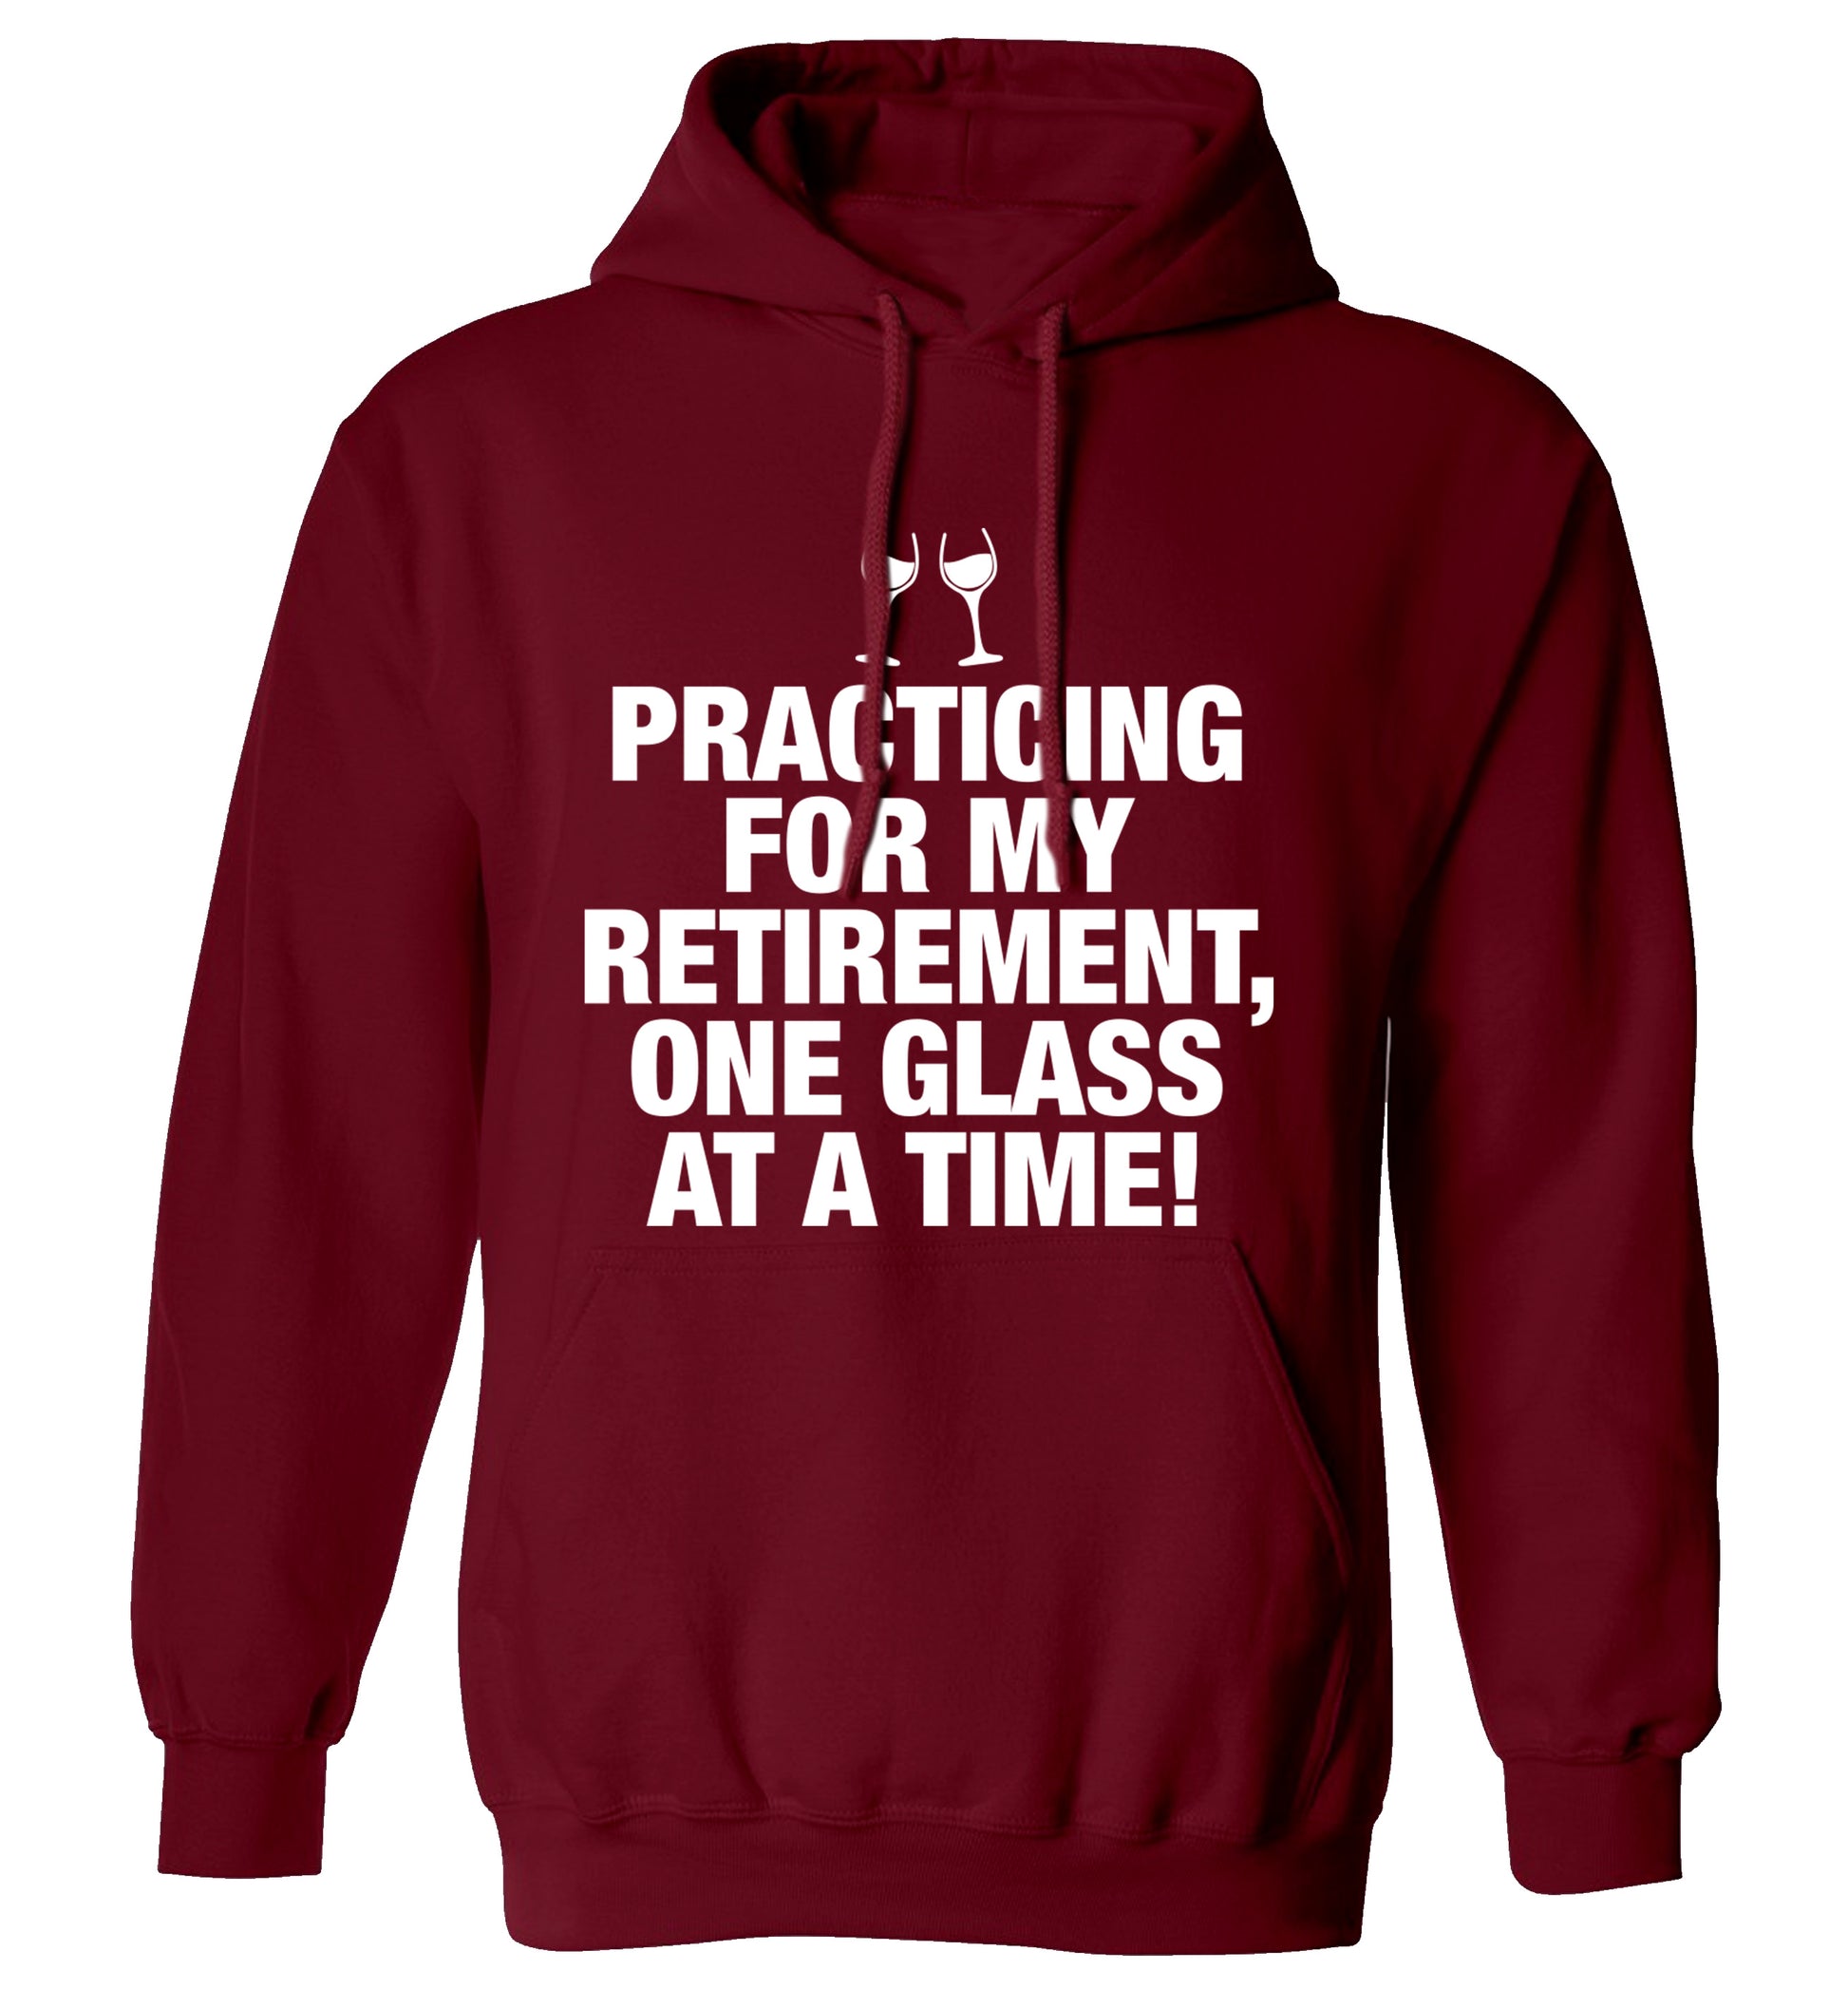 Practicing my retirement one glass at a time adults unisex maroon hoodie 2XL